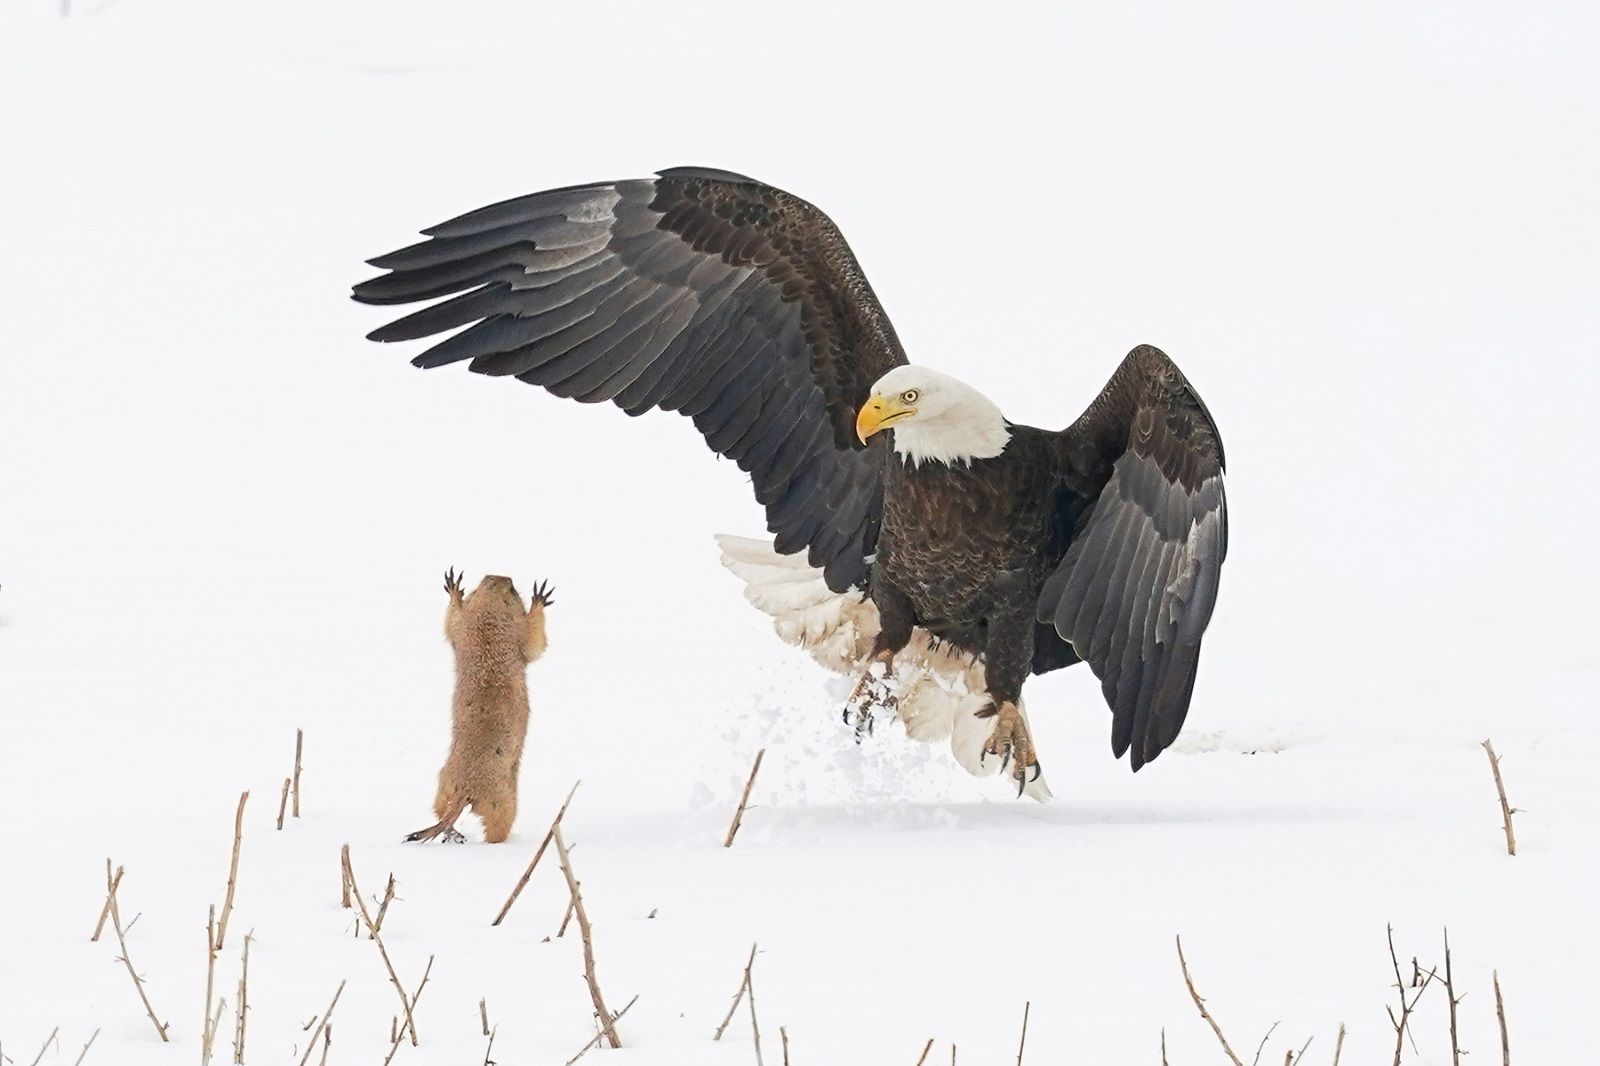 Enjoy a good giggle with the Comedy Wildlife Photography awards photo 44